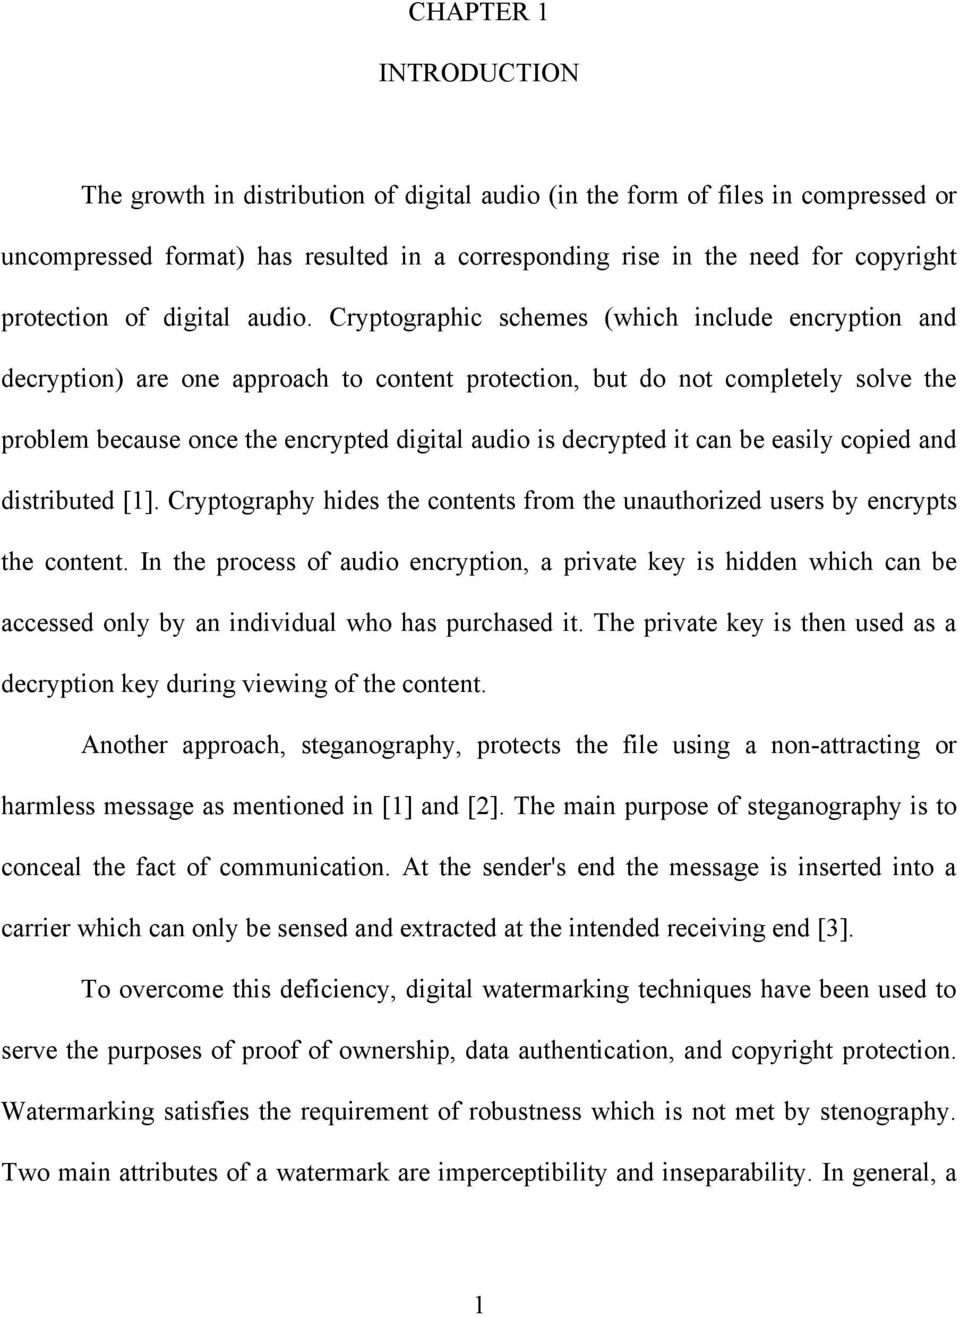 Cryptographic schemes (which include encryption and decryption) are one approach to content protection, but do not completely solve the problem because once the encrypted digital audio is decrypted